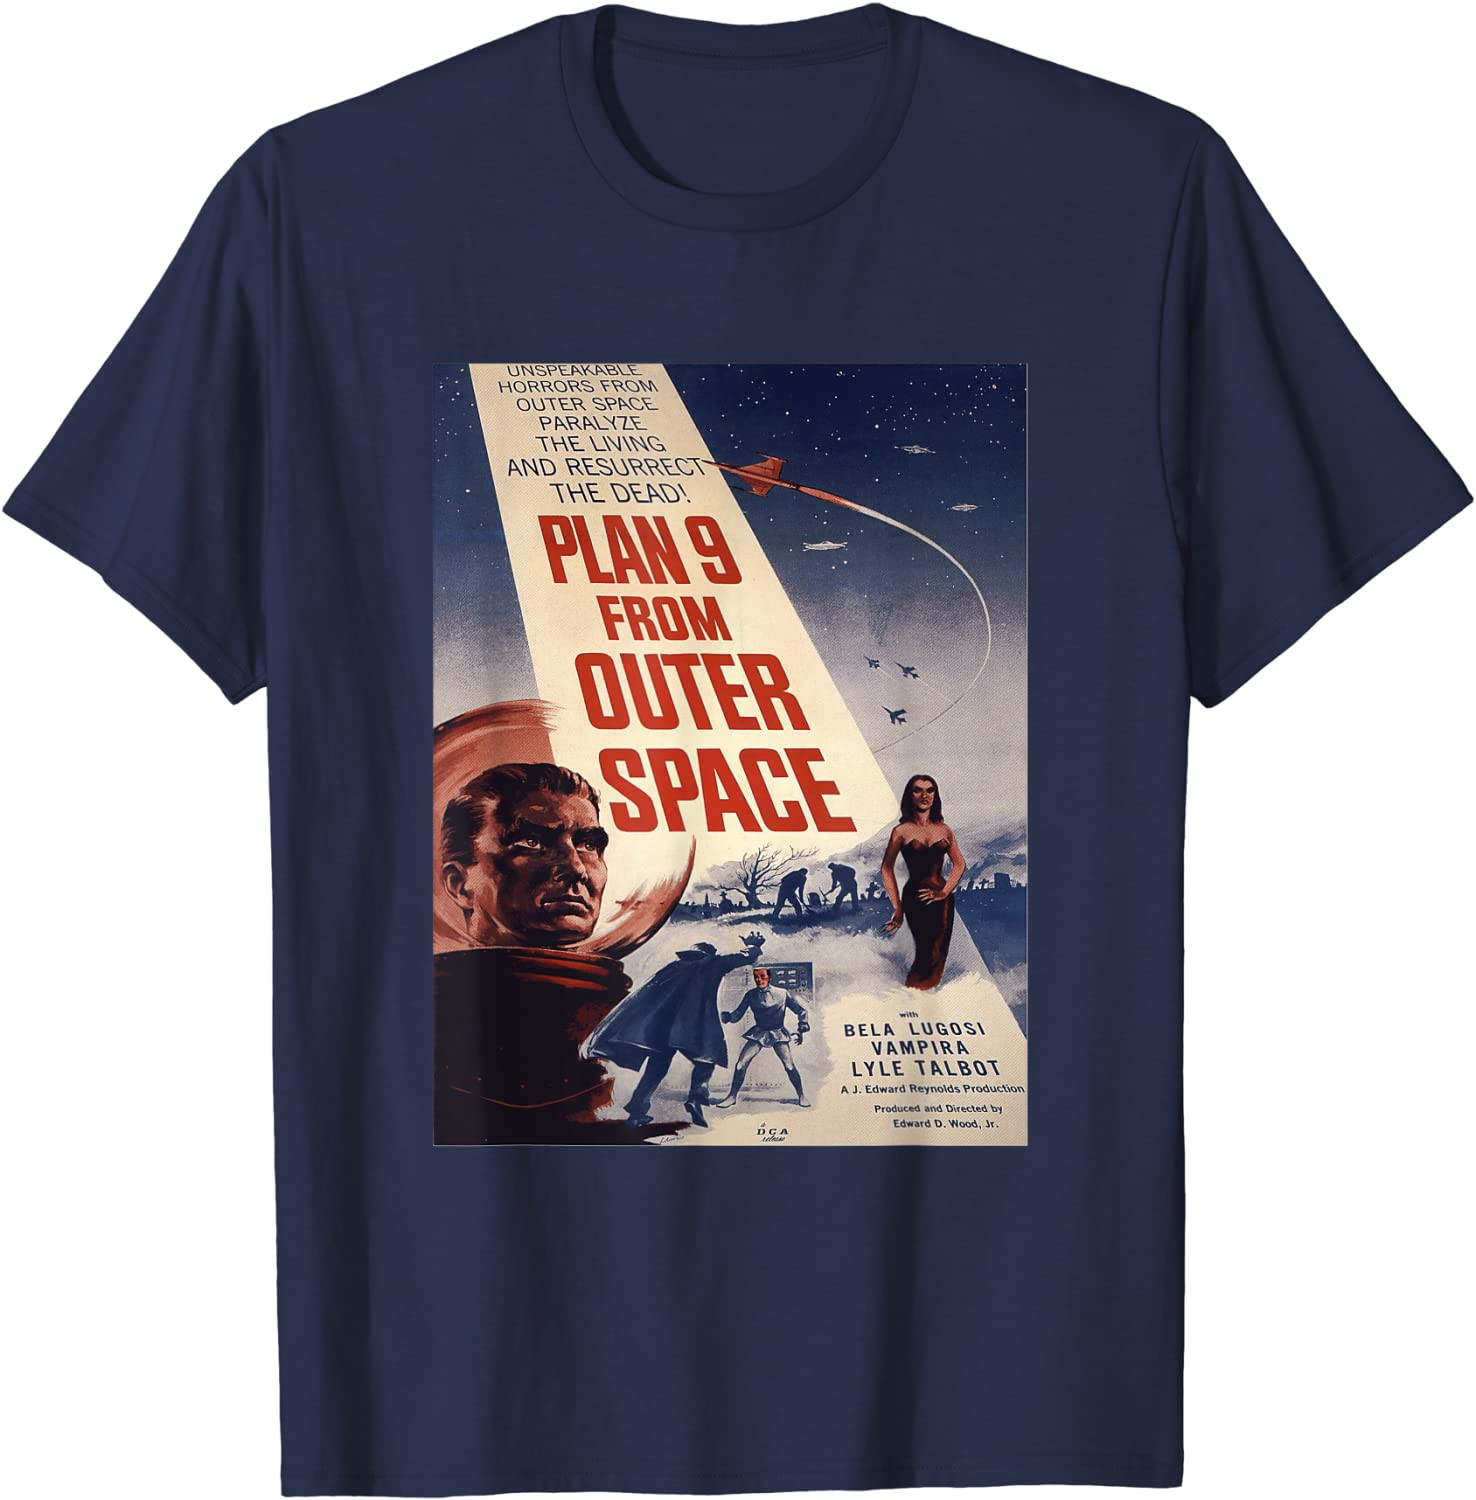 PLAN 9 FROM OUTER SPACE Sci-fi Sience Vintage Poster B Movie T-Shirt